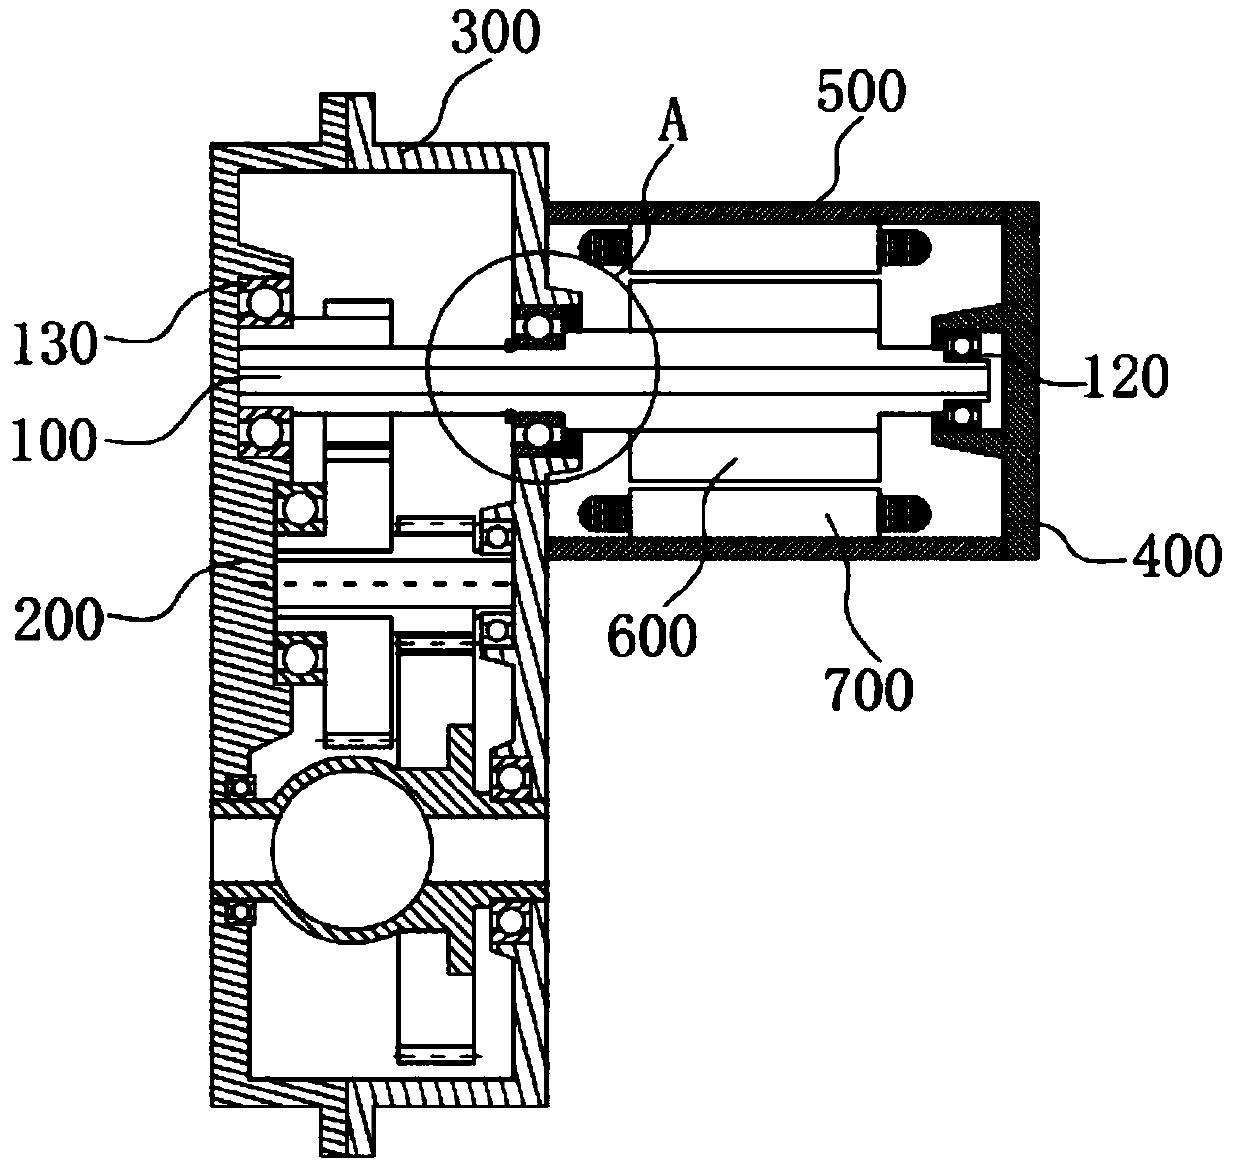 Integrated type power assembly and electric vehicle